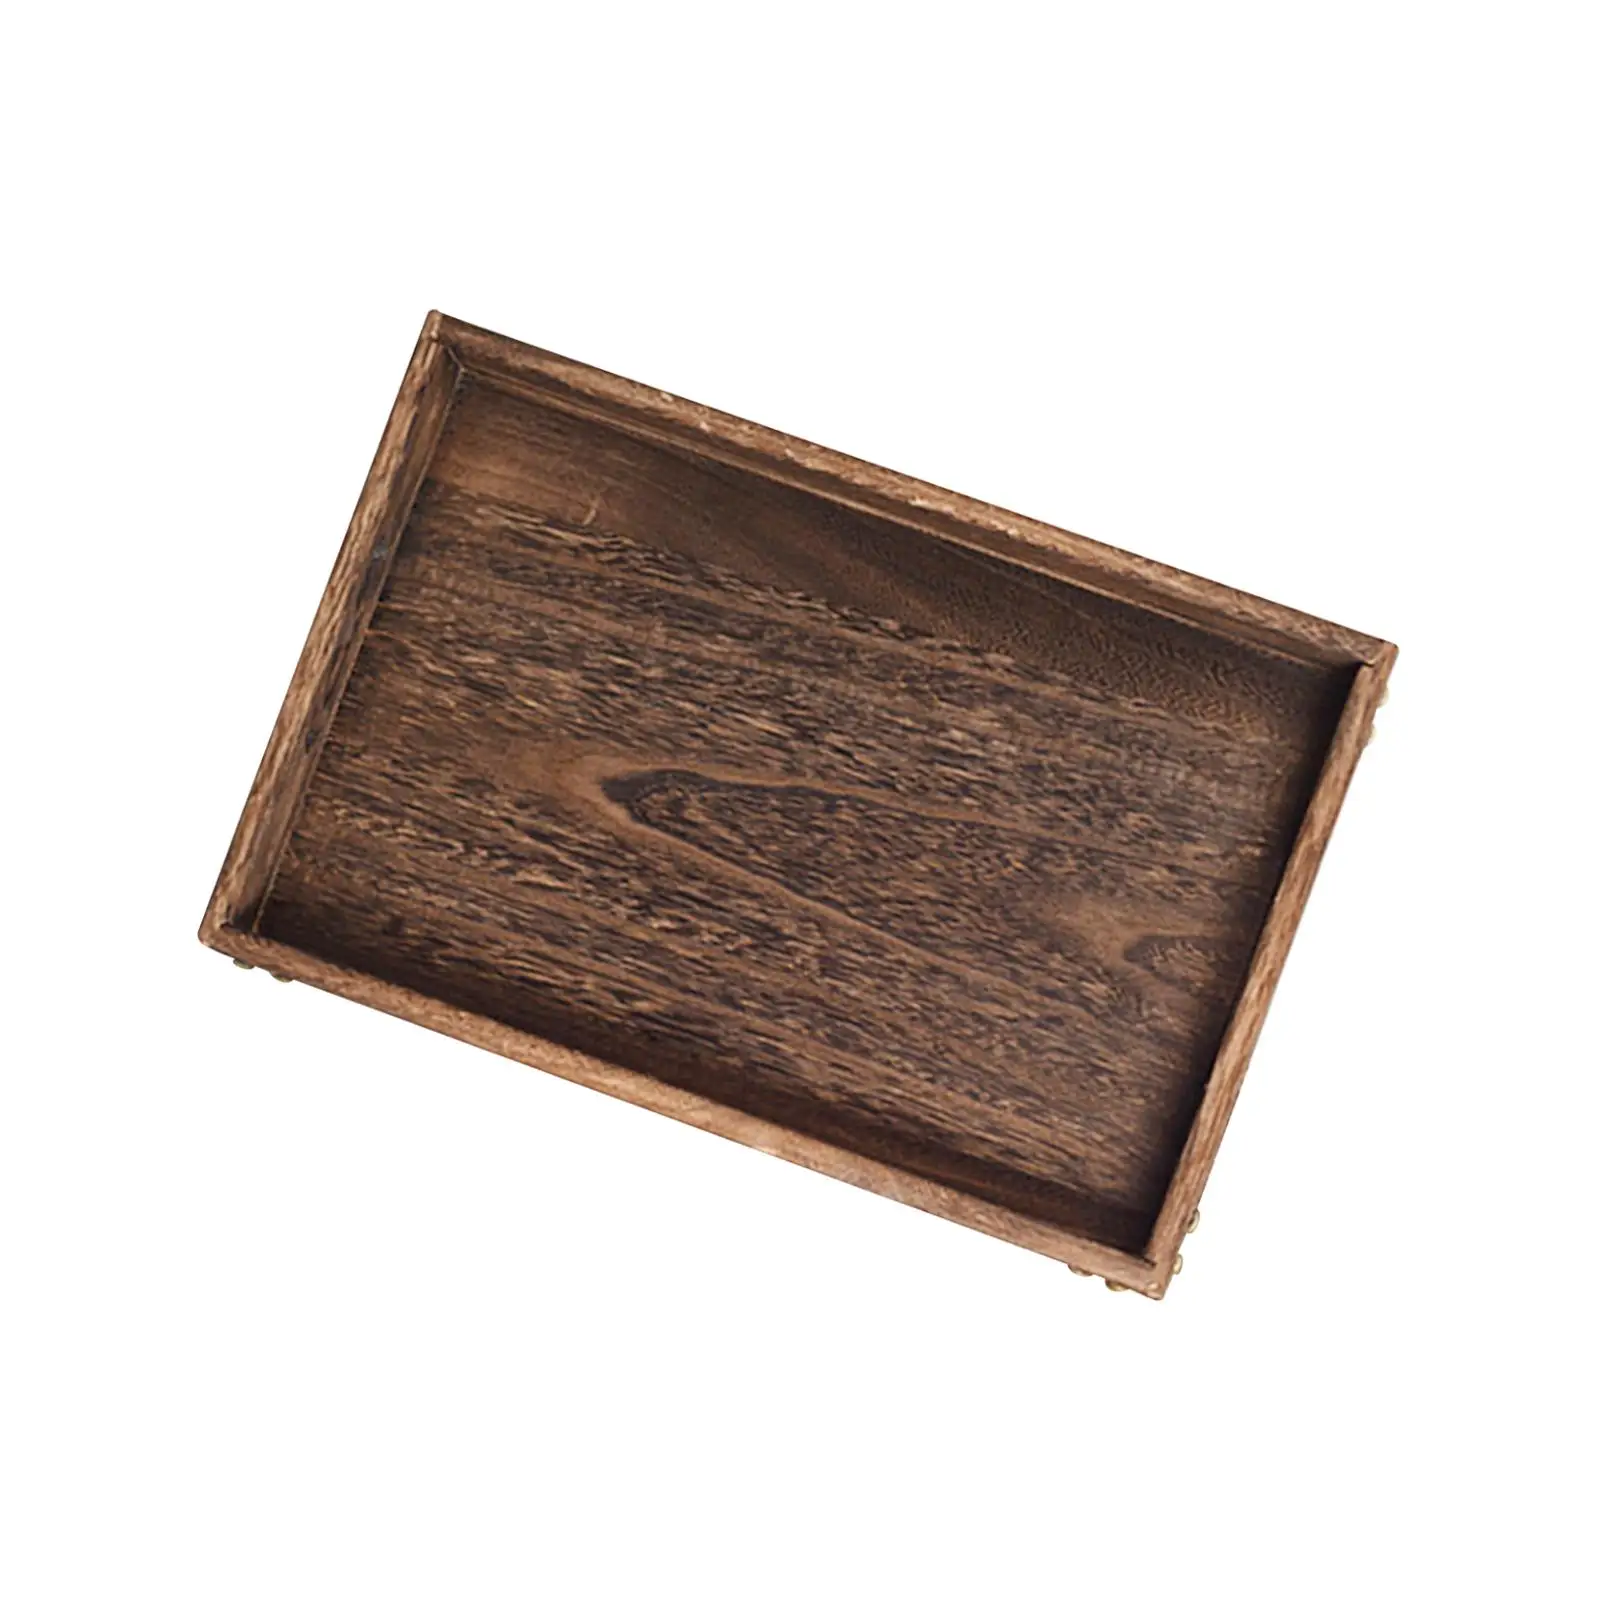 Wooden Serving Tray with Hollow Handle Eating Tray Housewarming Party Gift Stylish for Countertop Centerpiece Coffee Table Tray